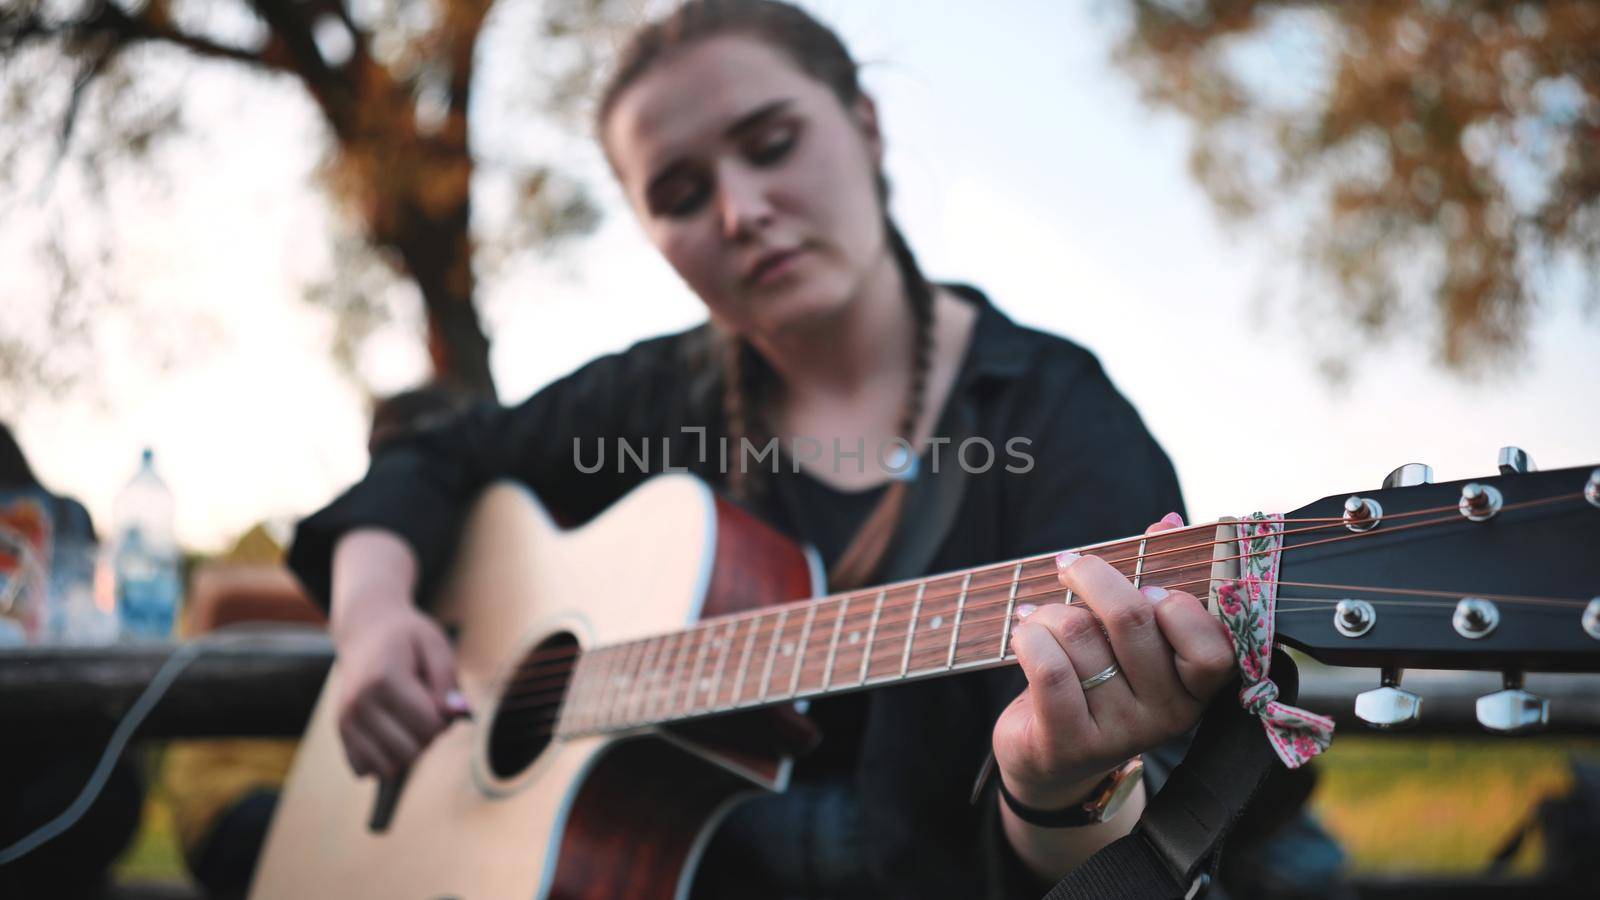 A young girl in nature plays the guitar during a picnic with friends